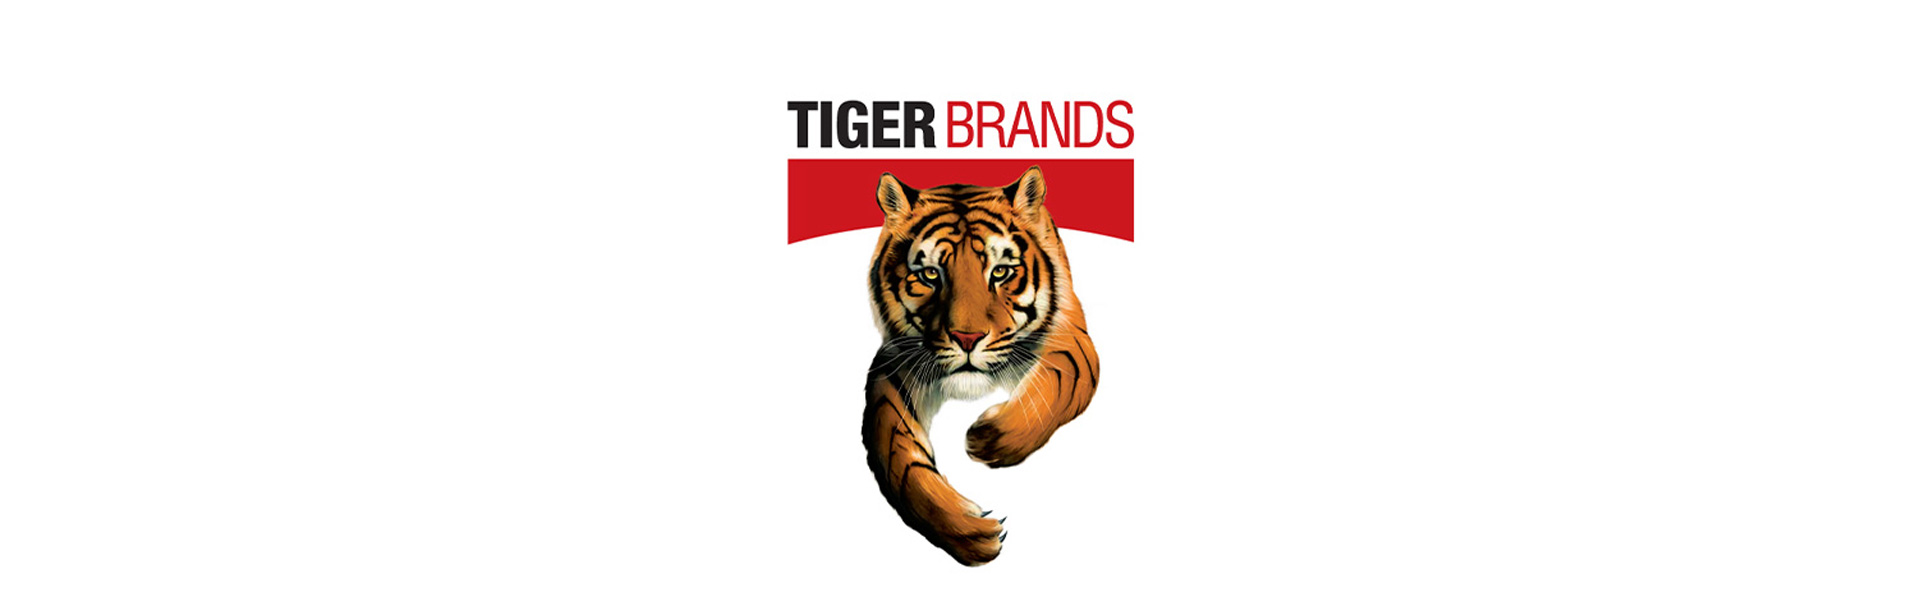 Tiger Brands | Food and Beverage Company